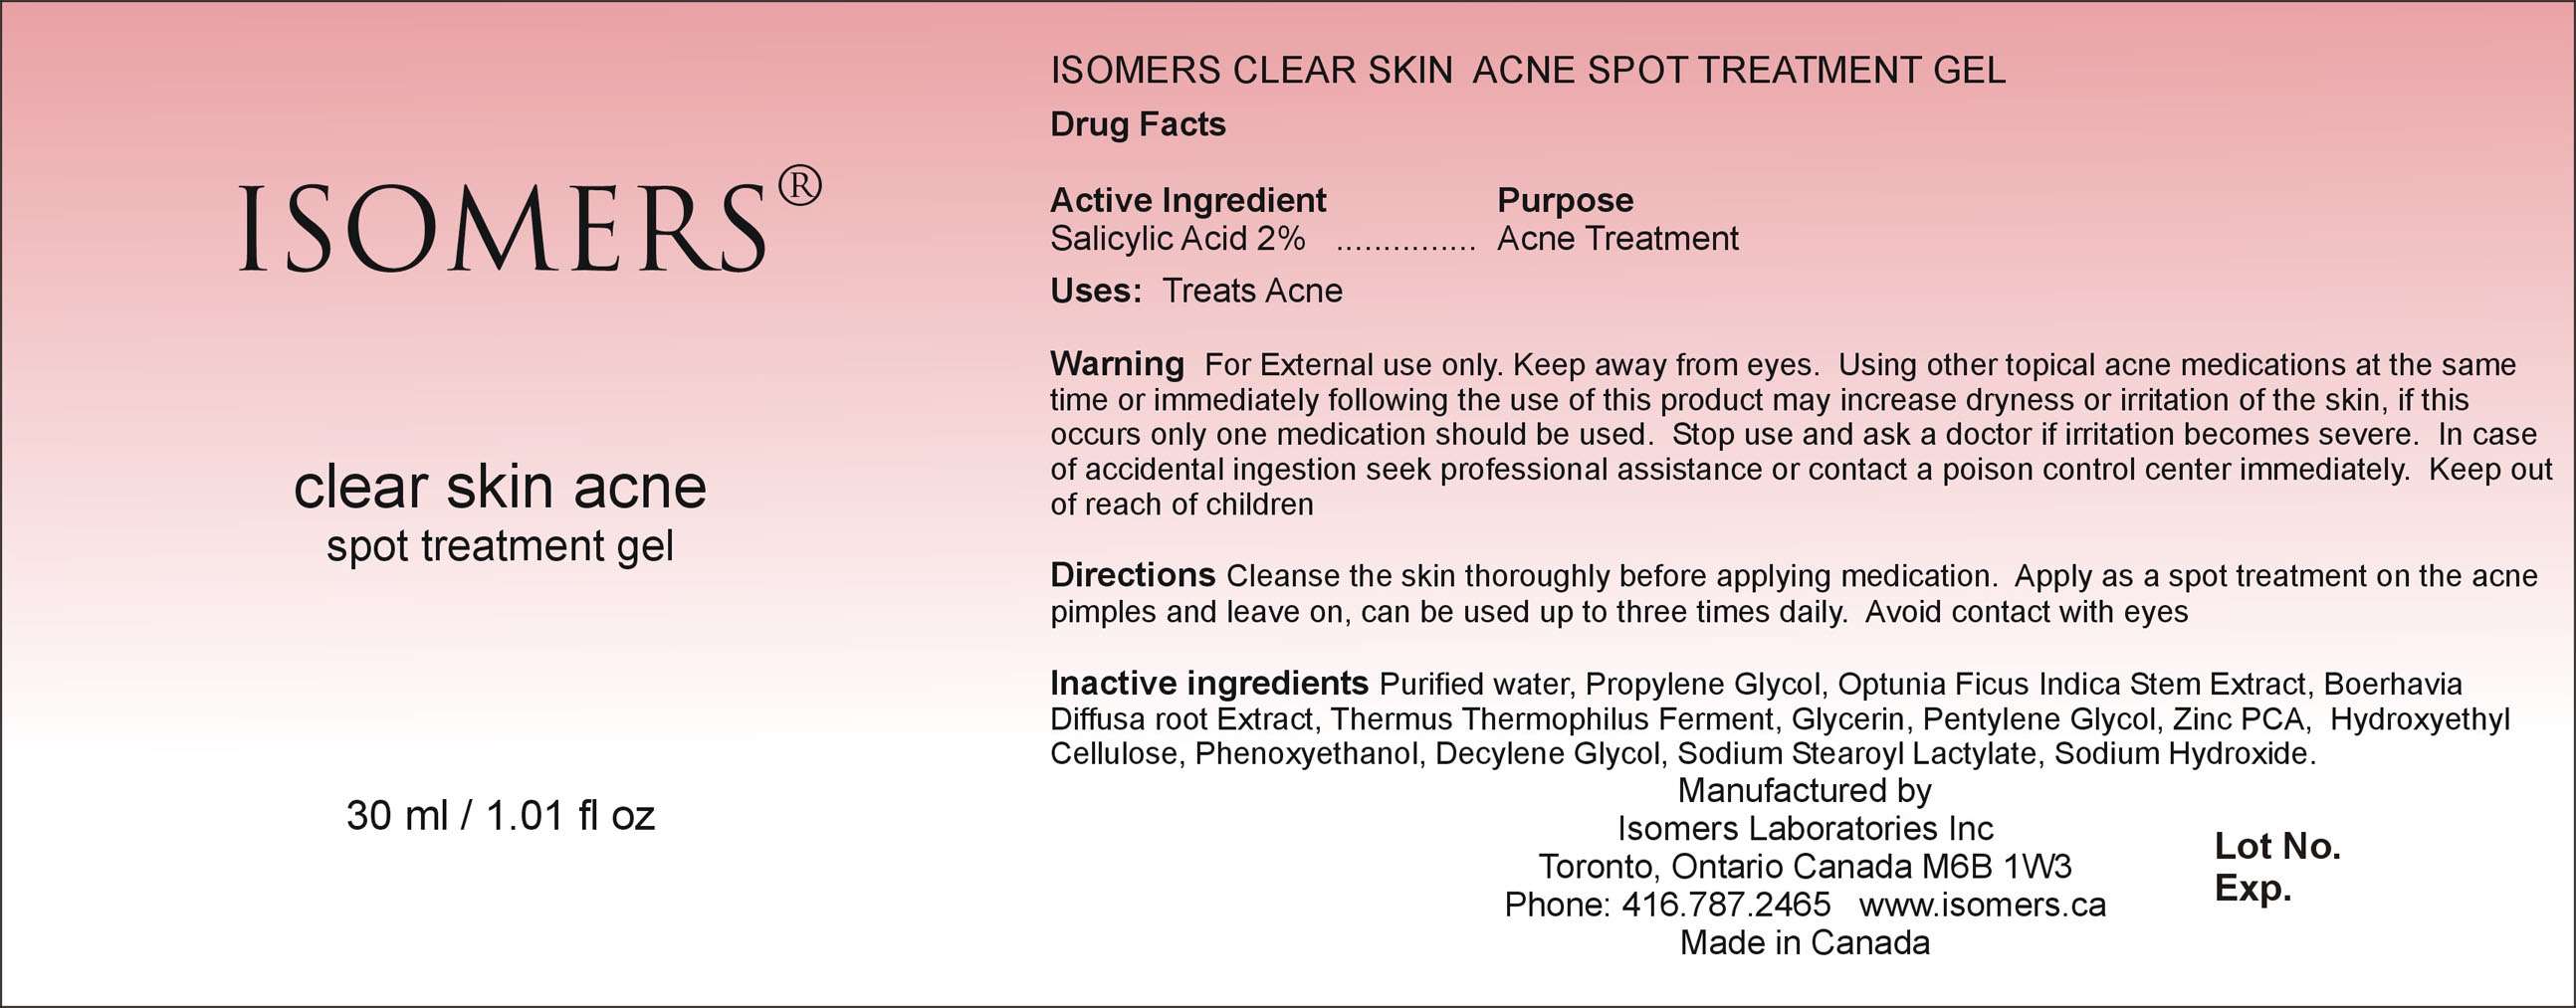 Isomers Clear Skin Acne Spot Treatment